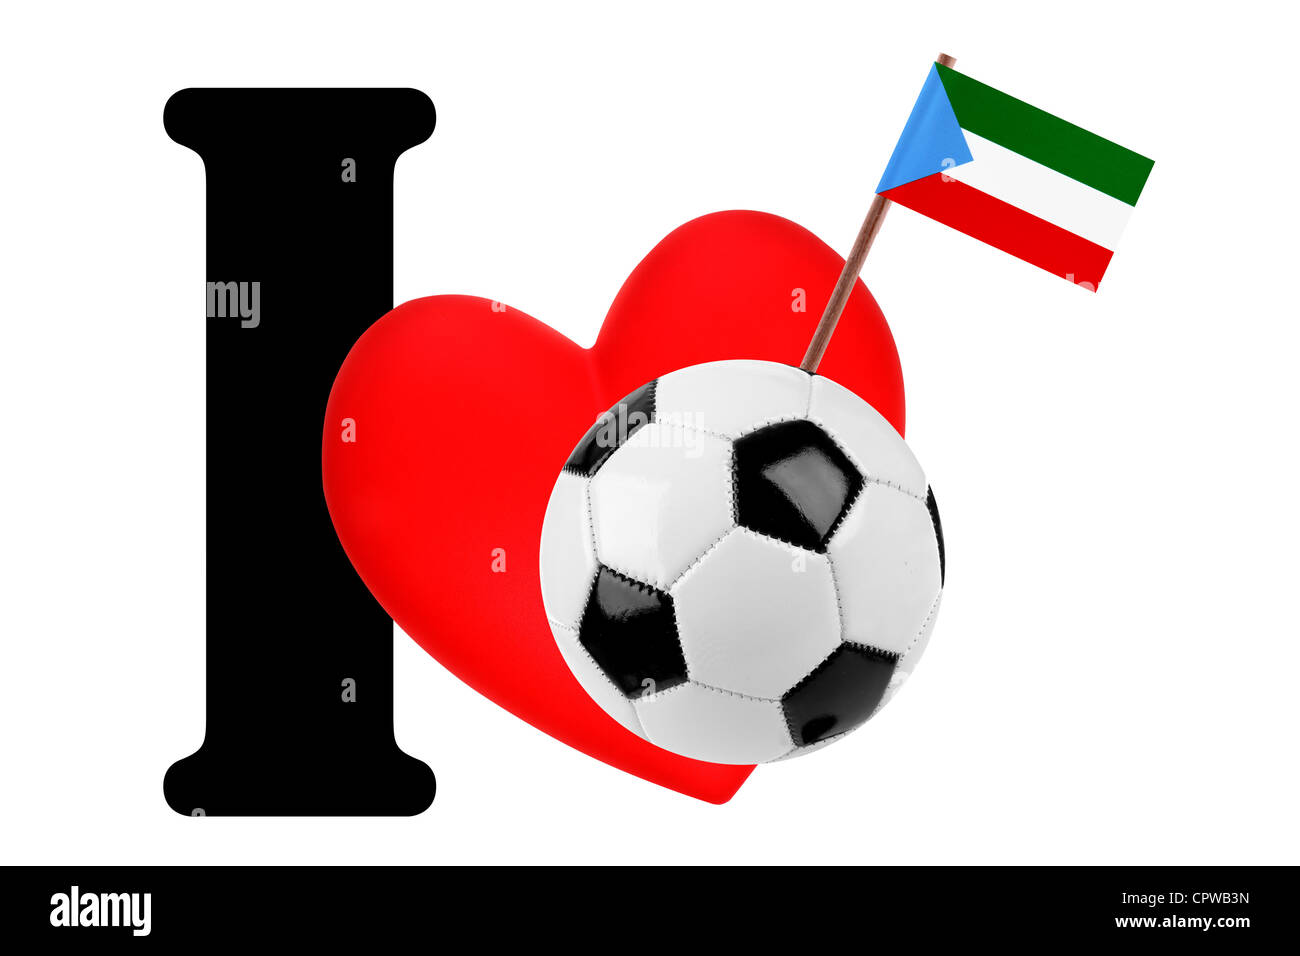 Small flag on a red heart and the word I to express love for the national flag of Equatorial Guinea Stock Photo